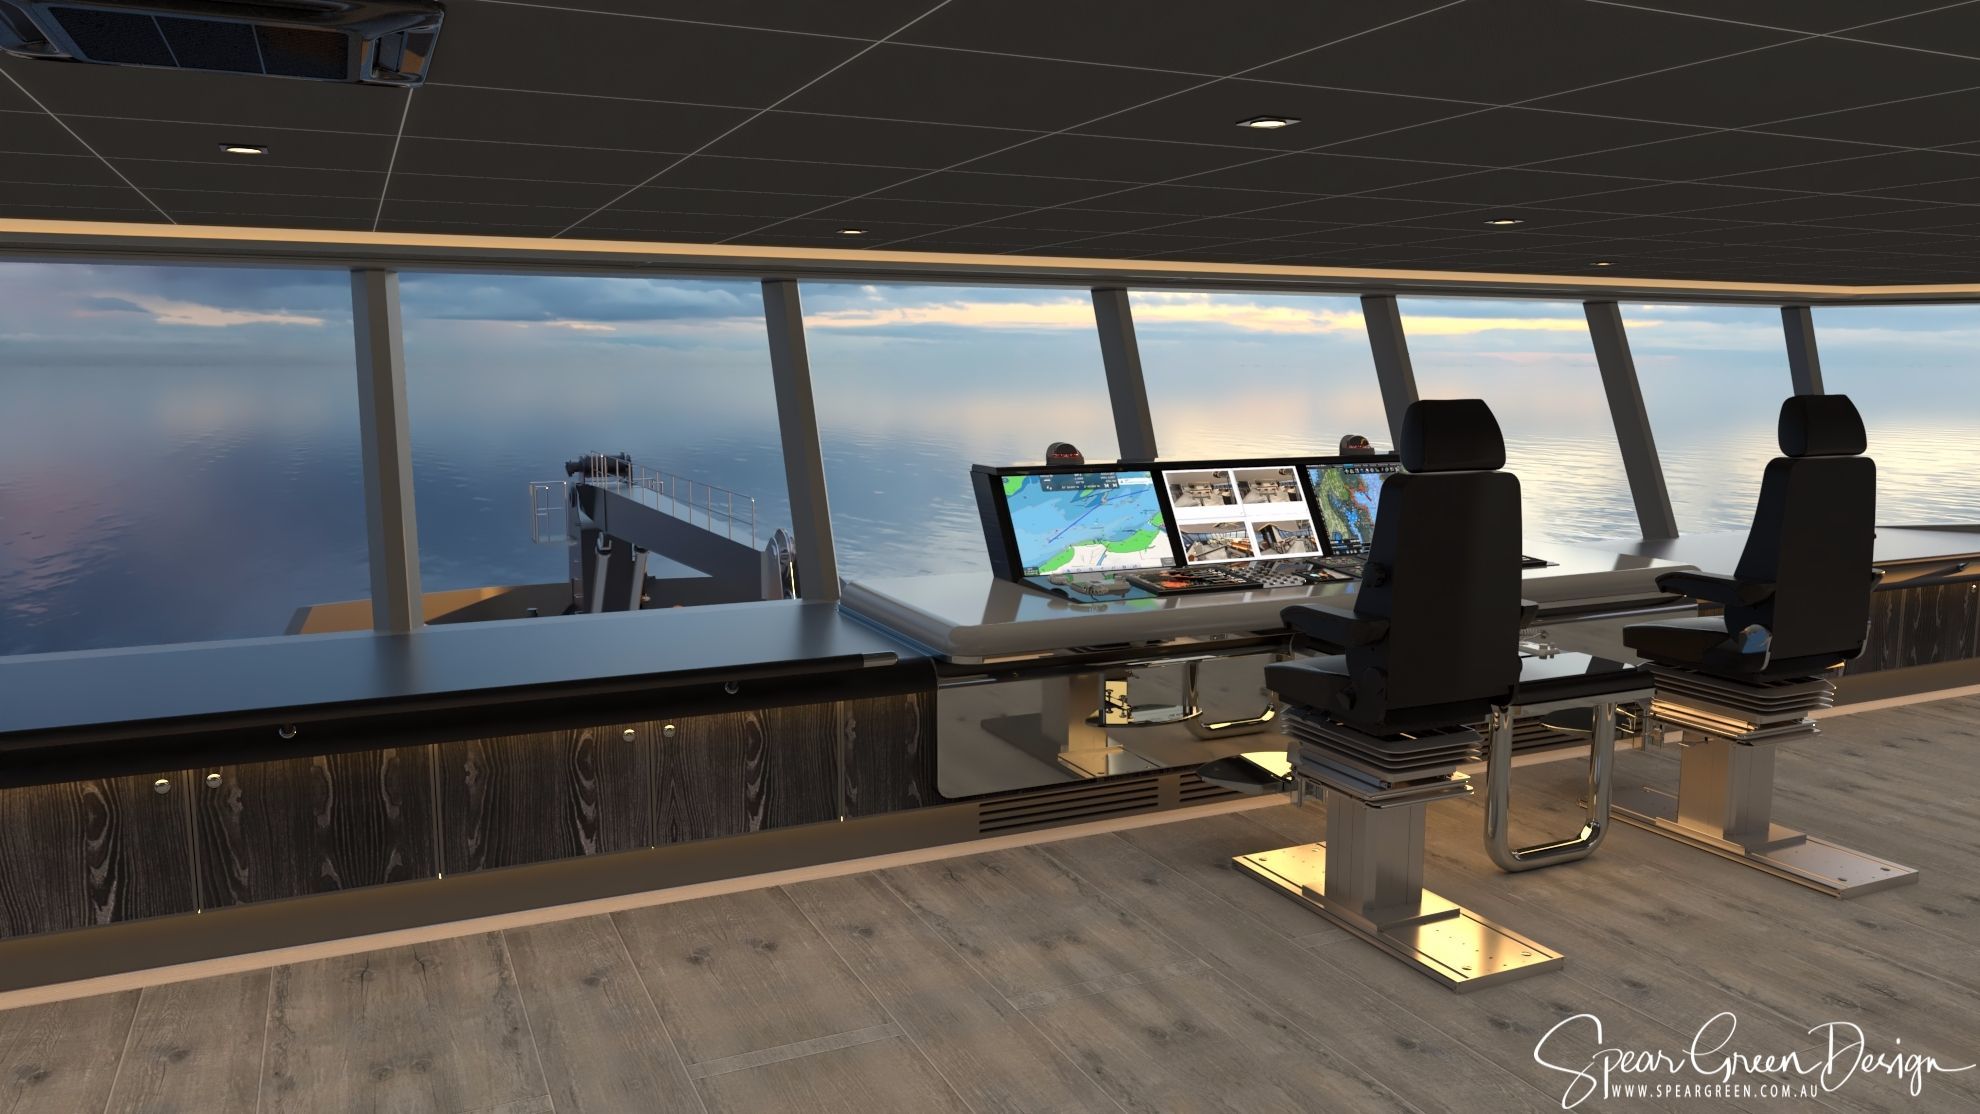 The Wheelhouse on the Scillonian IV Picture: Spear Green Design